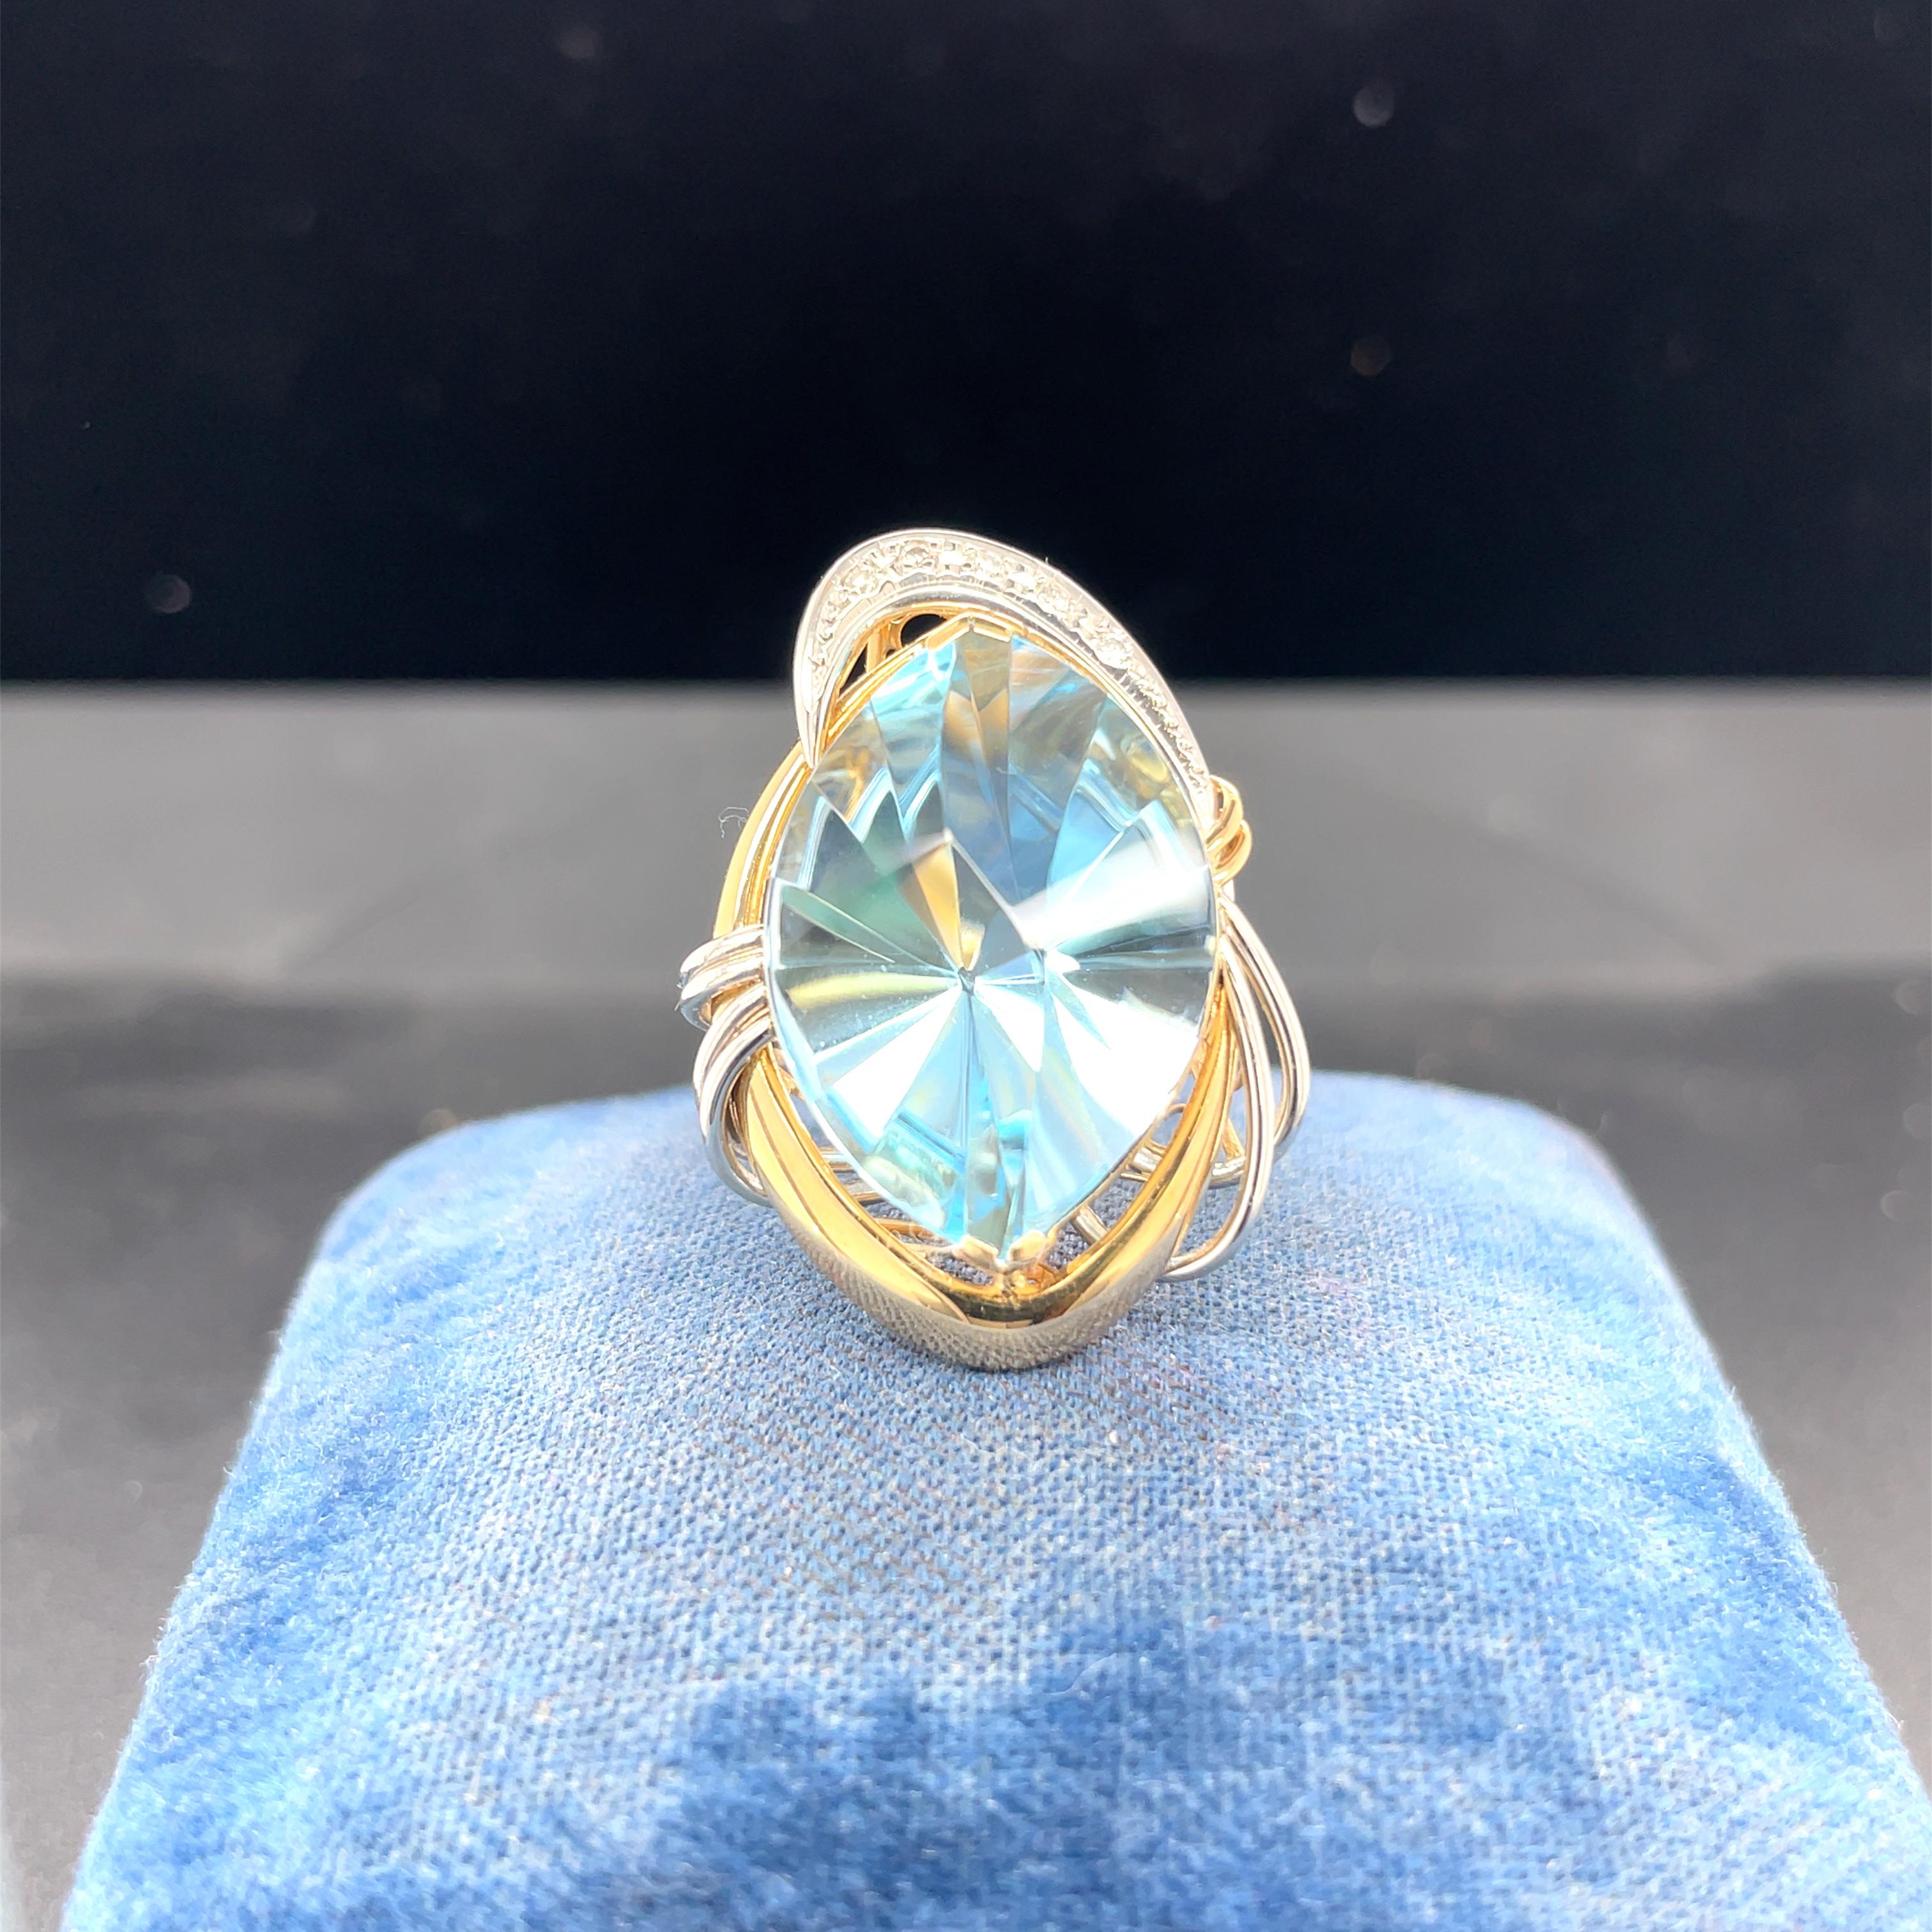 Item Details: 
Ring Size: 6
Metal Type: 18k Yellow Gold  & Platinum [Hallmarked, and Tested]
Weight:  10.6 grams

Center Stone Details: 
Type: Aquamarine, Natural
Cut: Marquise Shape, Novelty Cut
Color: Blue

Diamond Details:
Weight: .07ct, total